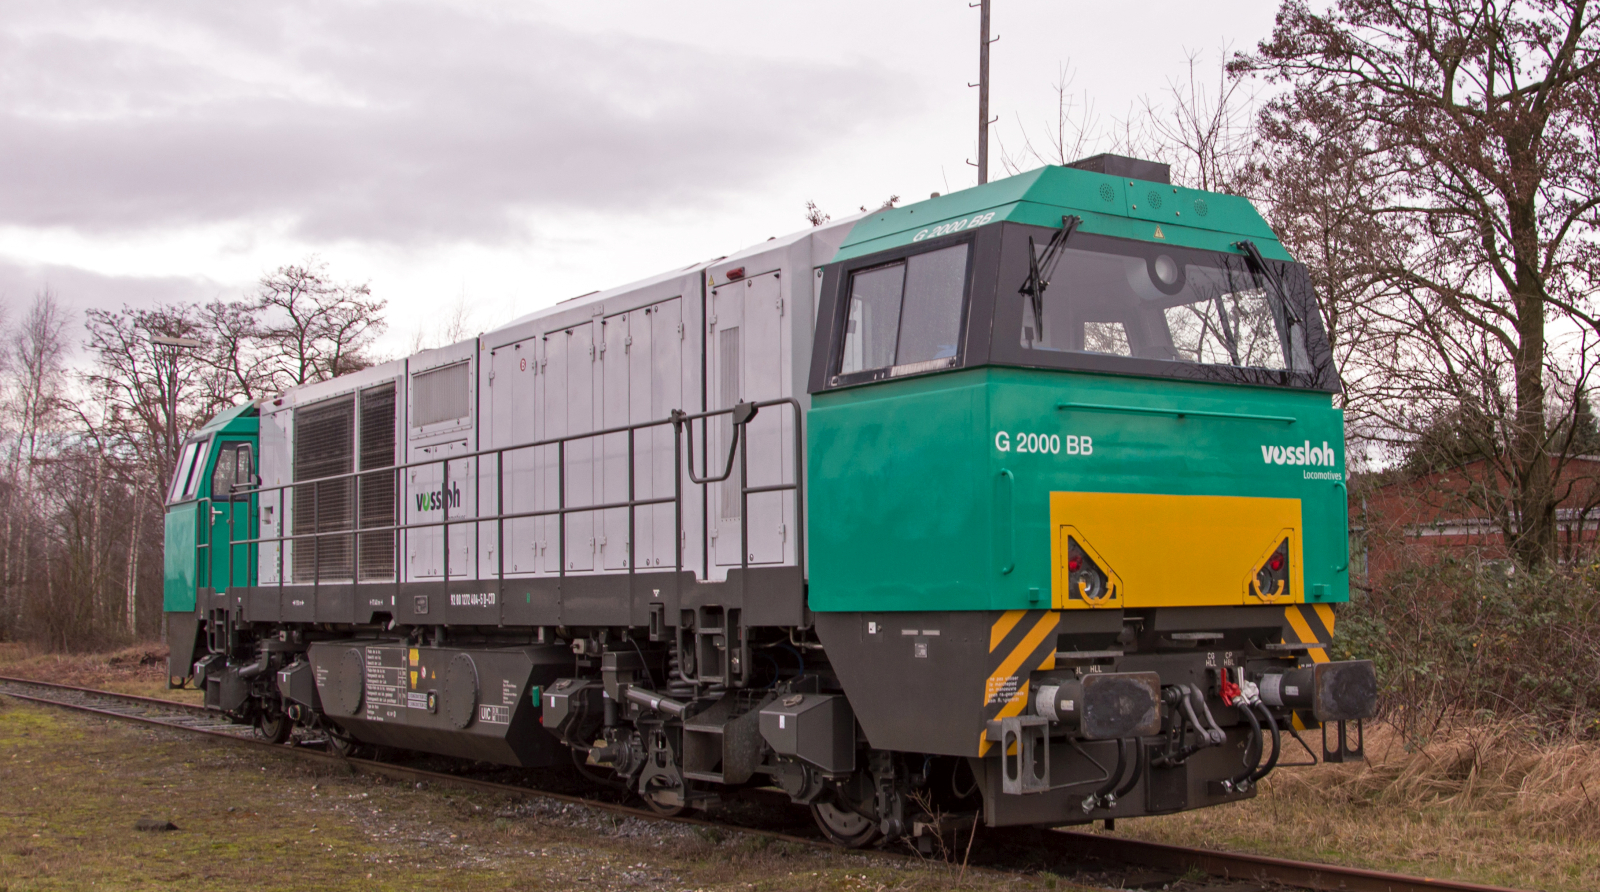 The former Captrain 2006 and RRF 1105 parked in Emmerich in January 2014